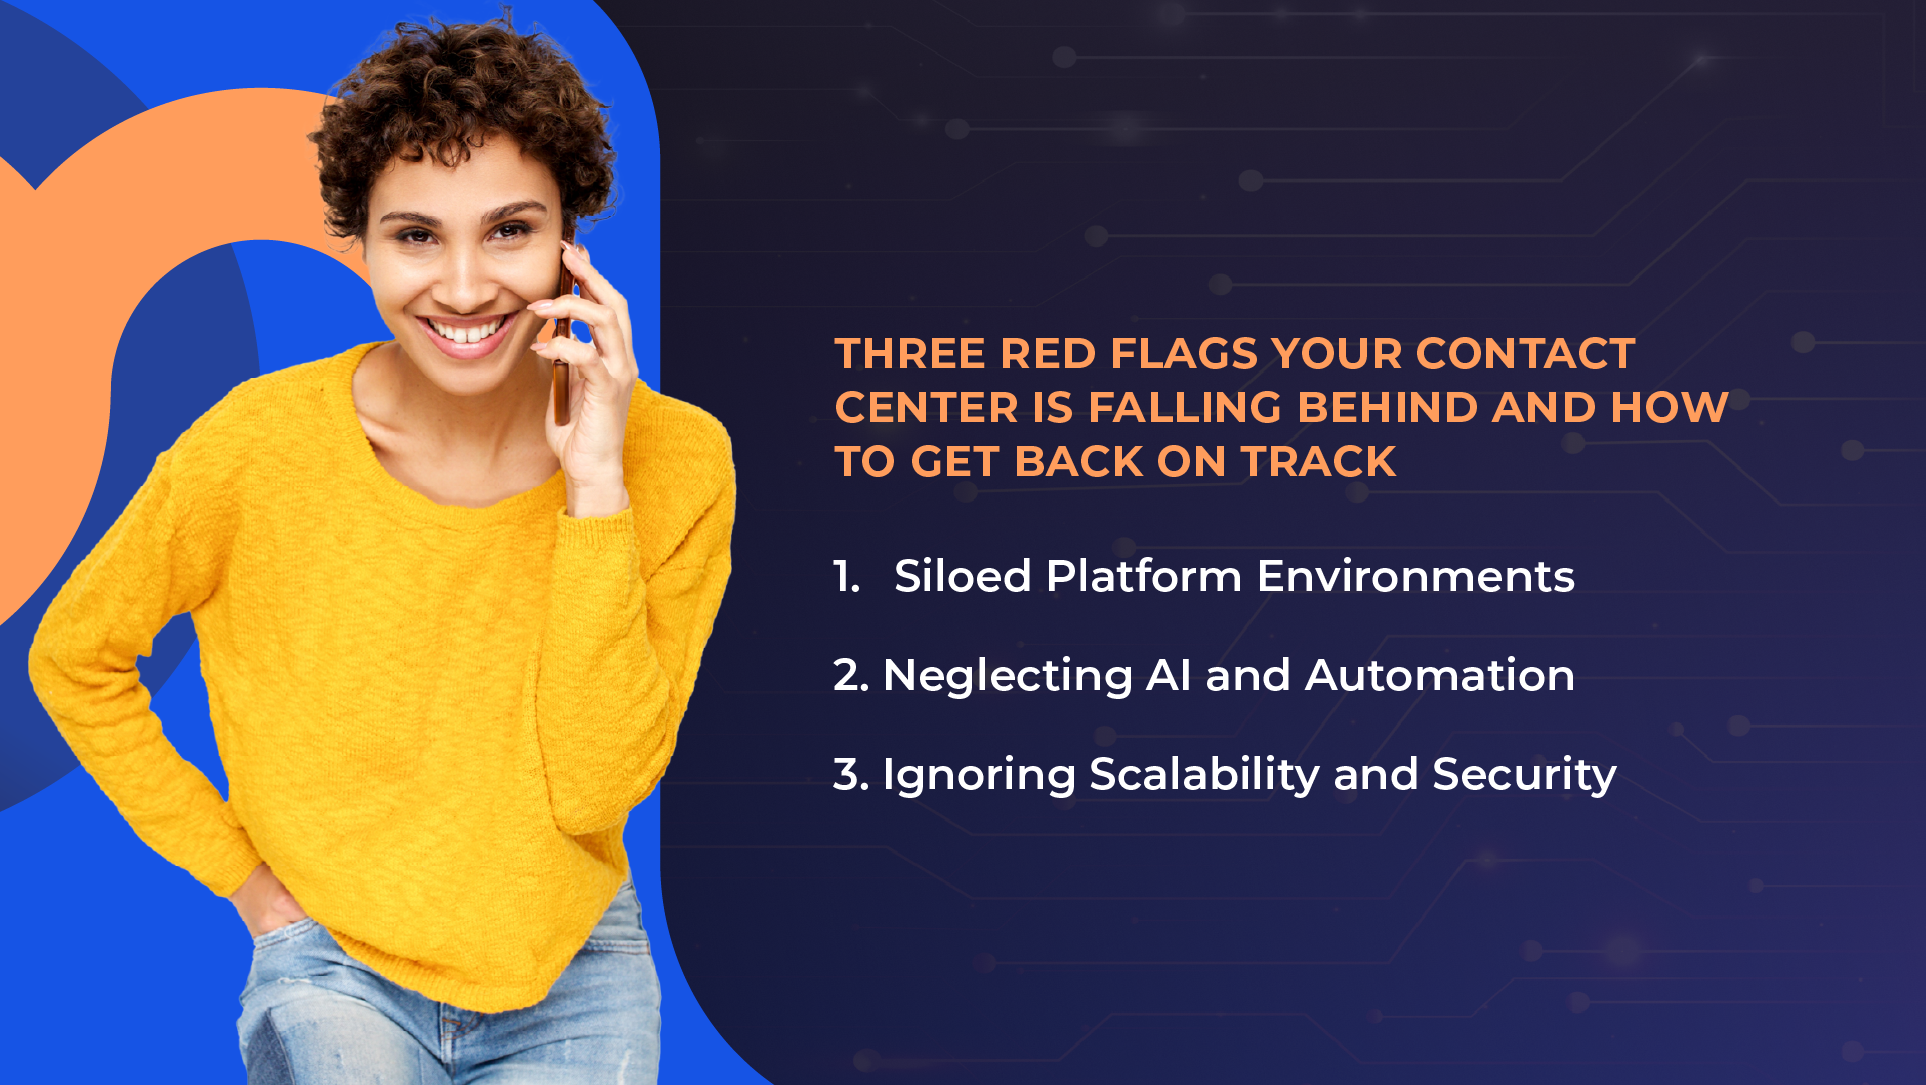 Three-Red-Flags-Your-Contact-Center-is-Falling-Behind-and-How-to-Get-Back-on-Track